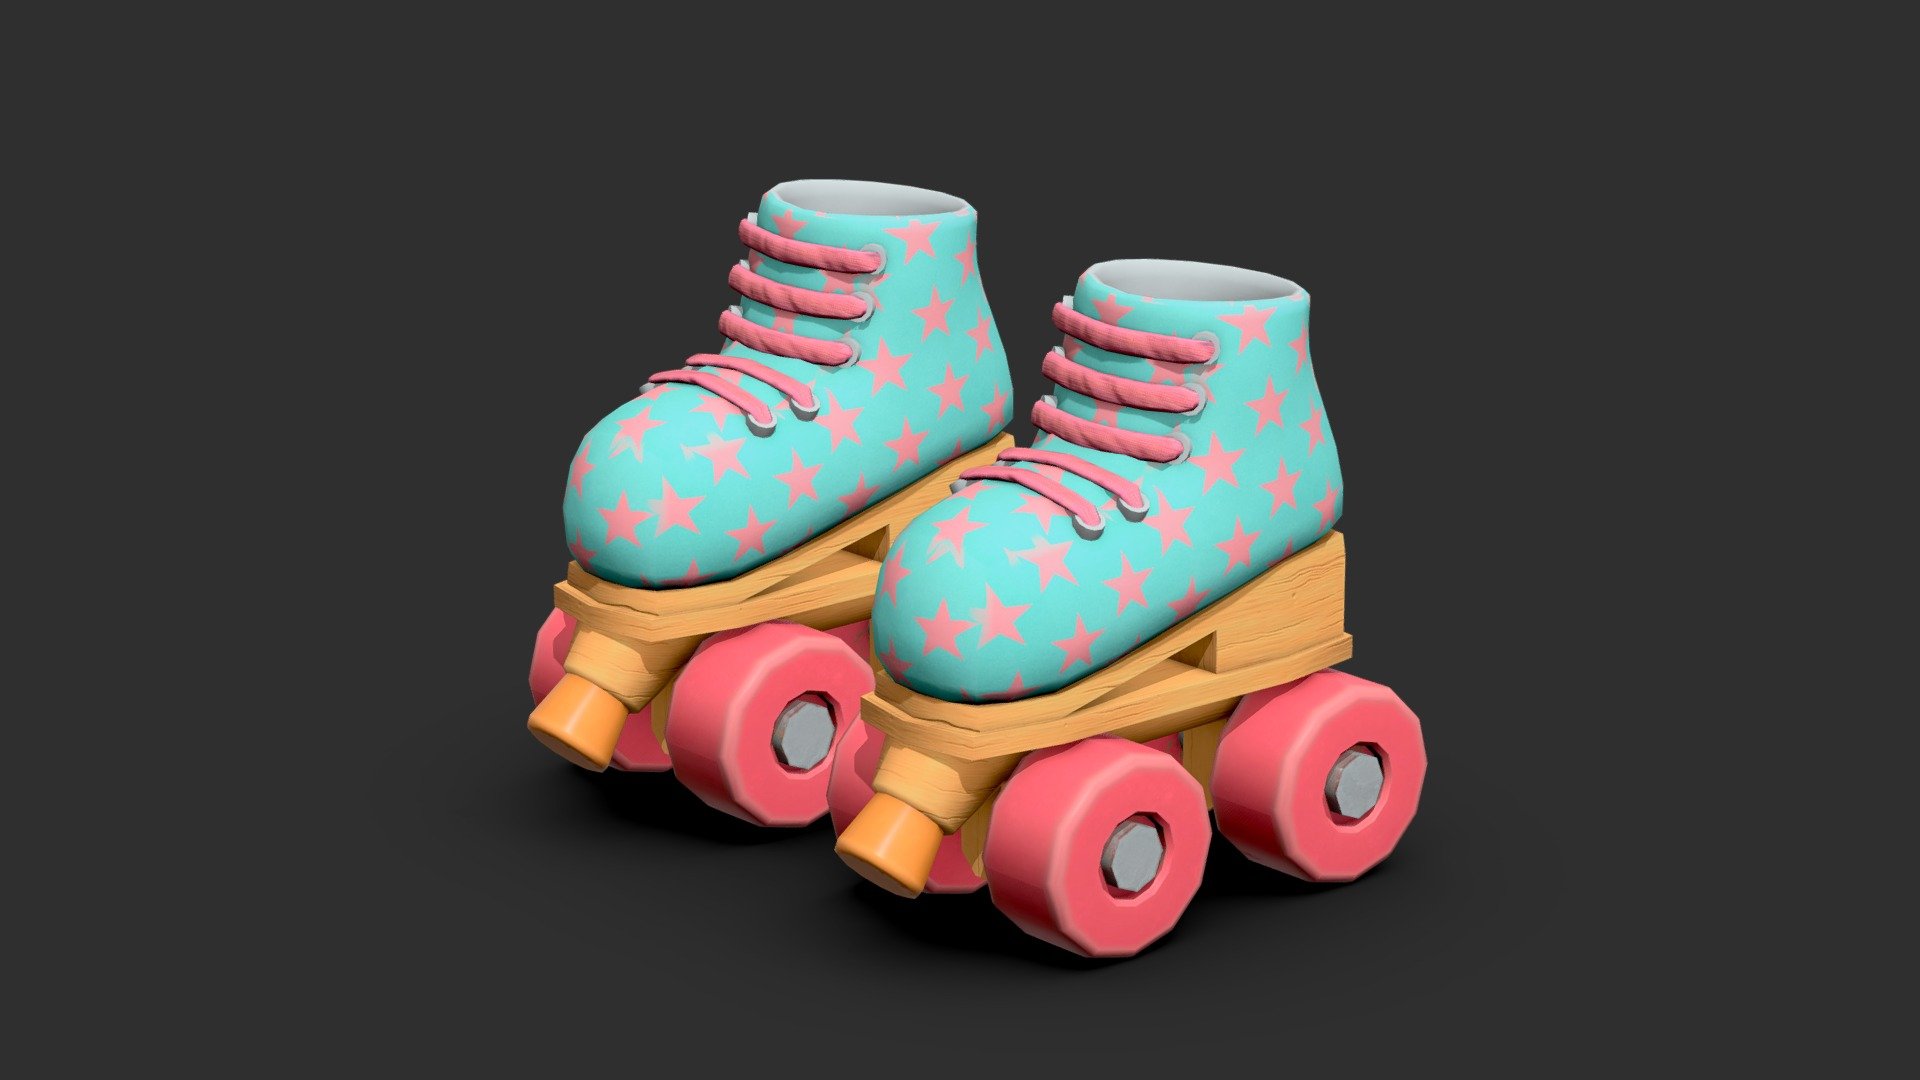 Quad roller skates for your renders and games

Textures:

Diffuse color, Roughness, Metallic, Normal

All textures are 2K

Files Formats:

Blend

Fbx

Obj - Quad roller skates - Buy Royalty Free 3D model by Vanessa Araújo (@vanessa3d) 3d model